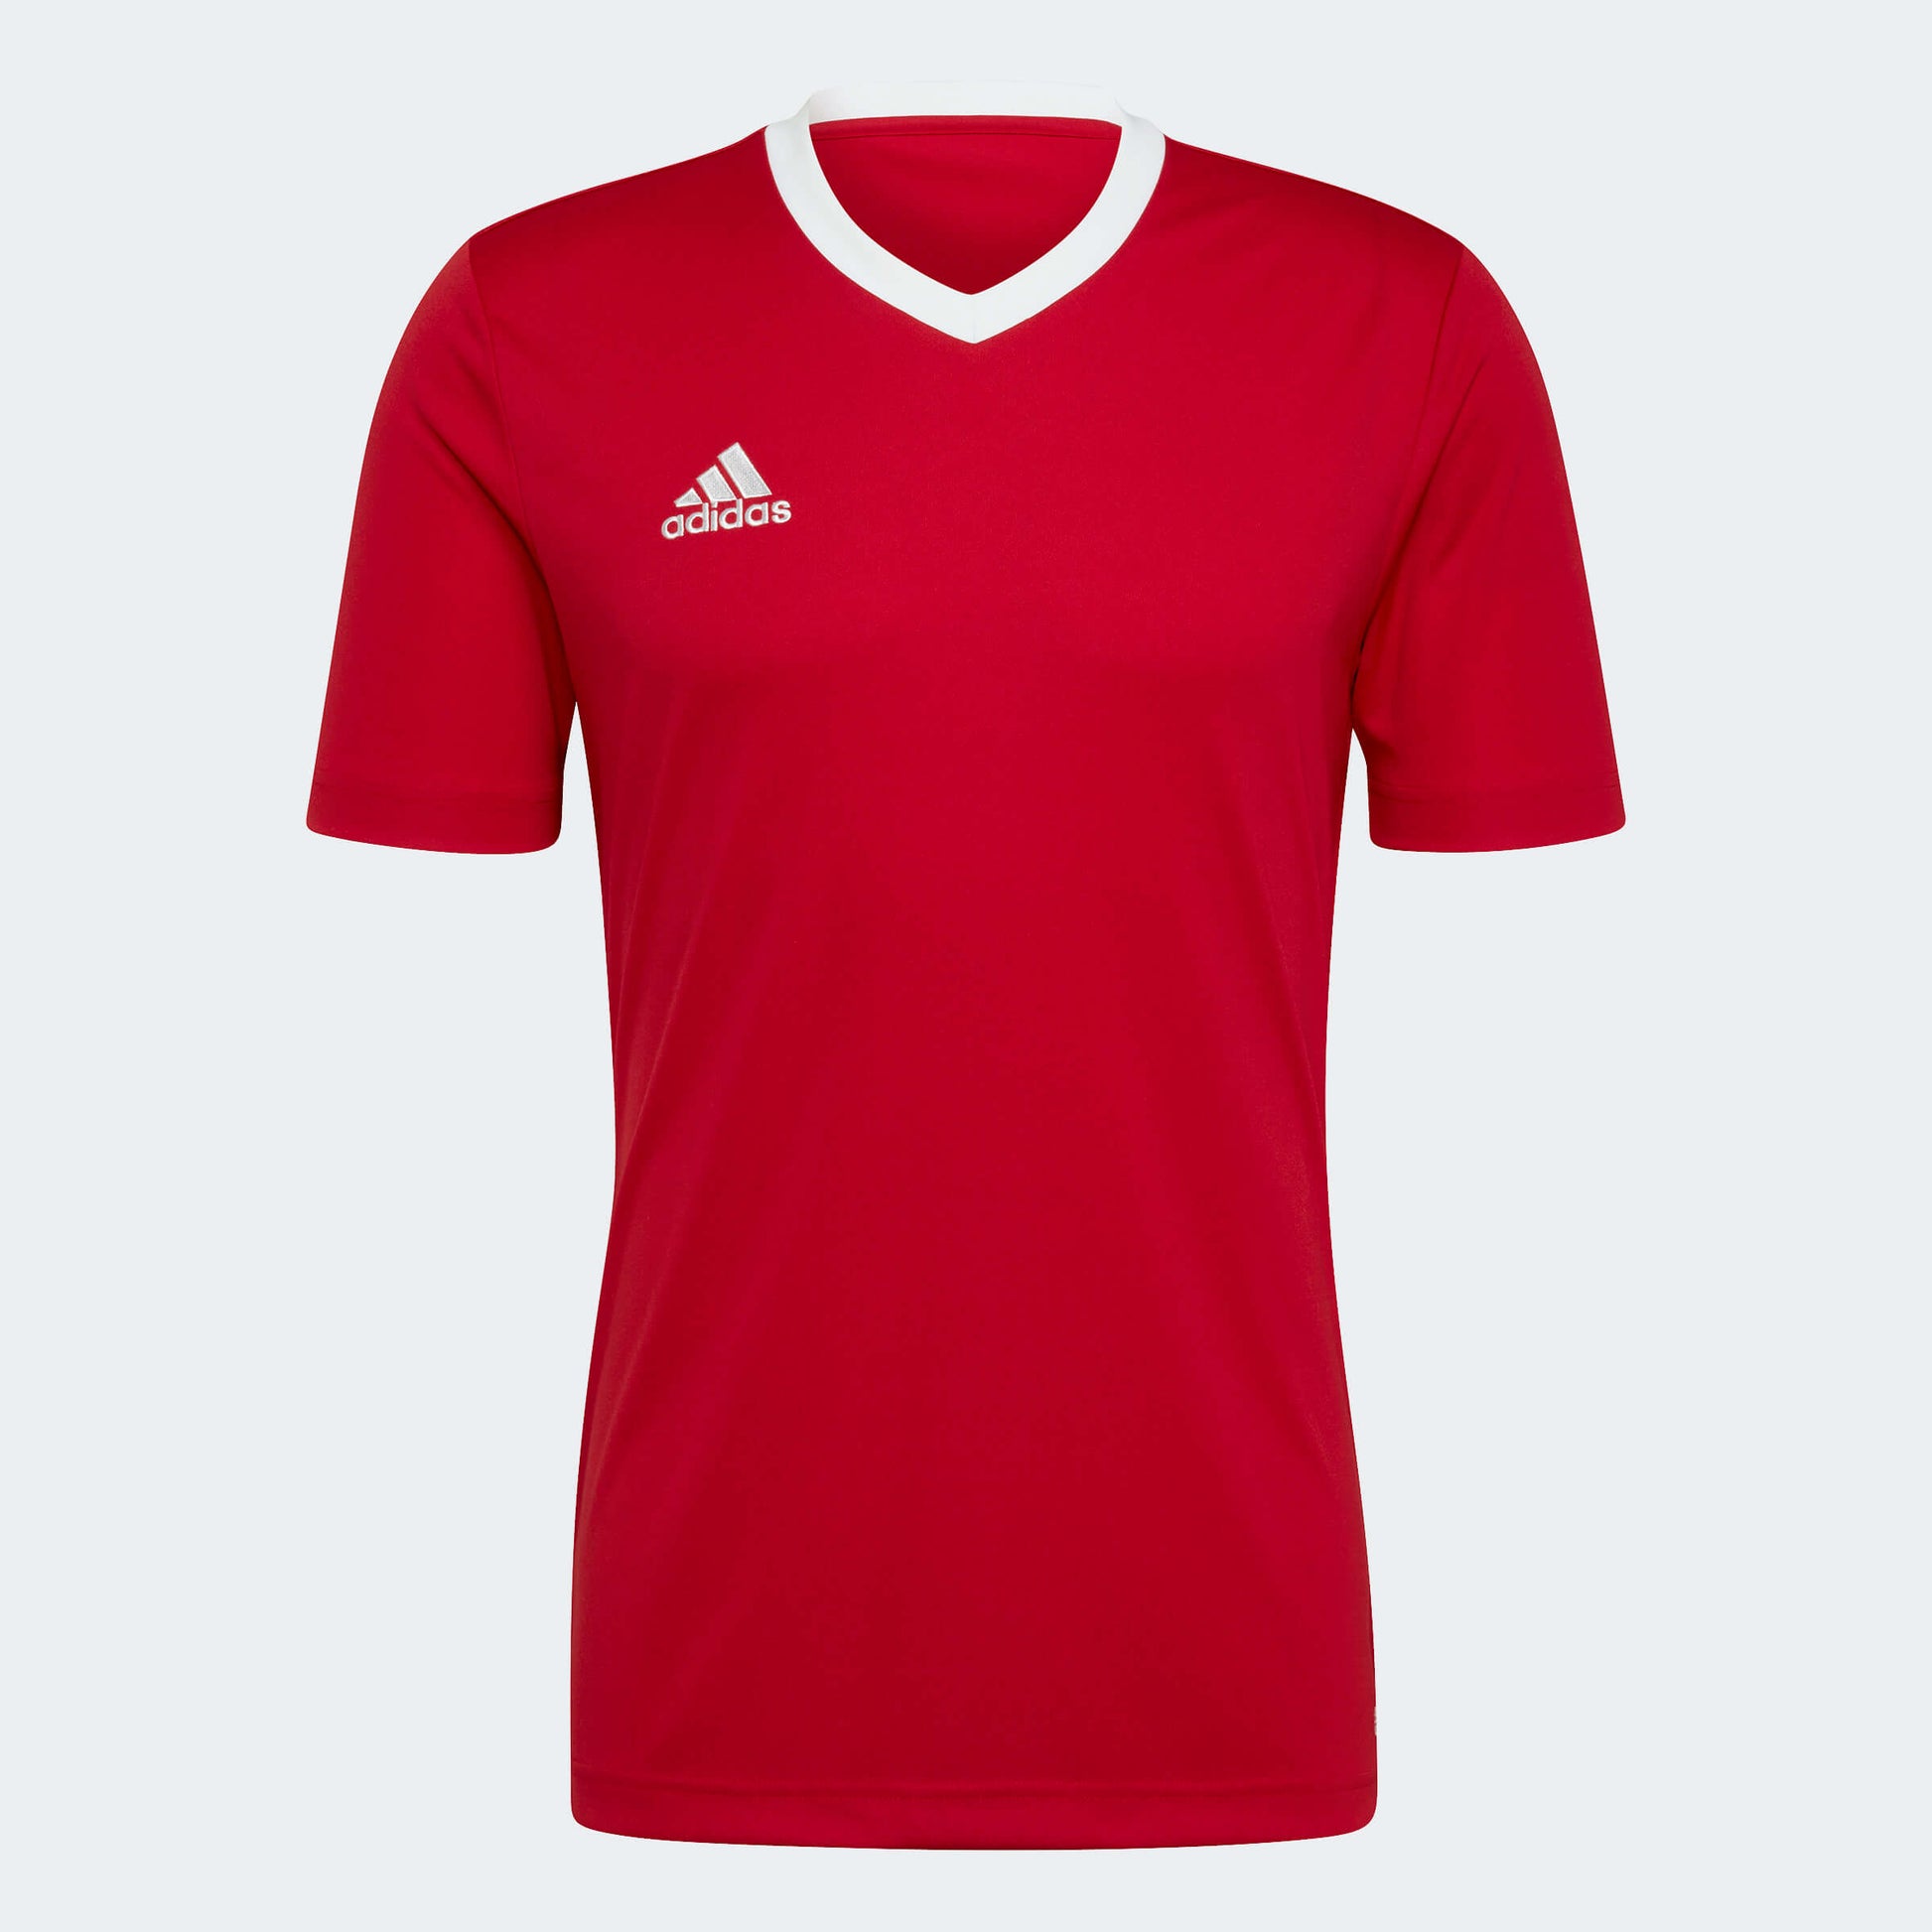 adidas Entrada 22 Jersey Red-White (Front)